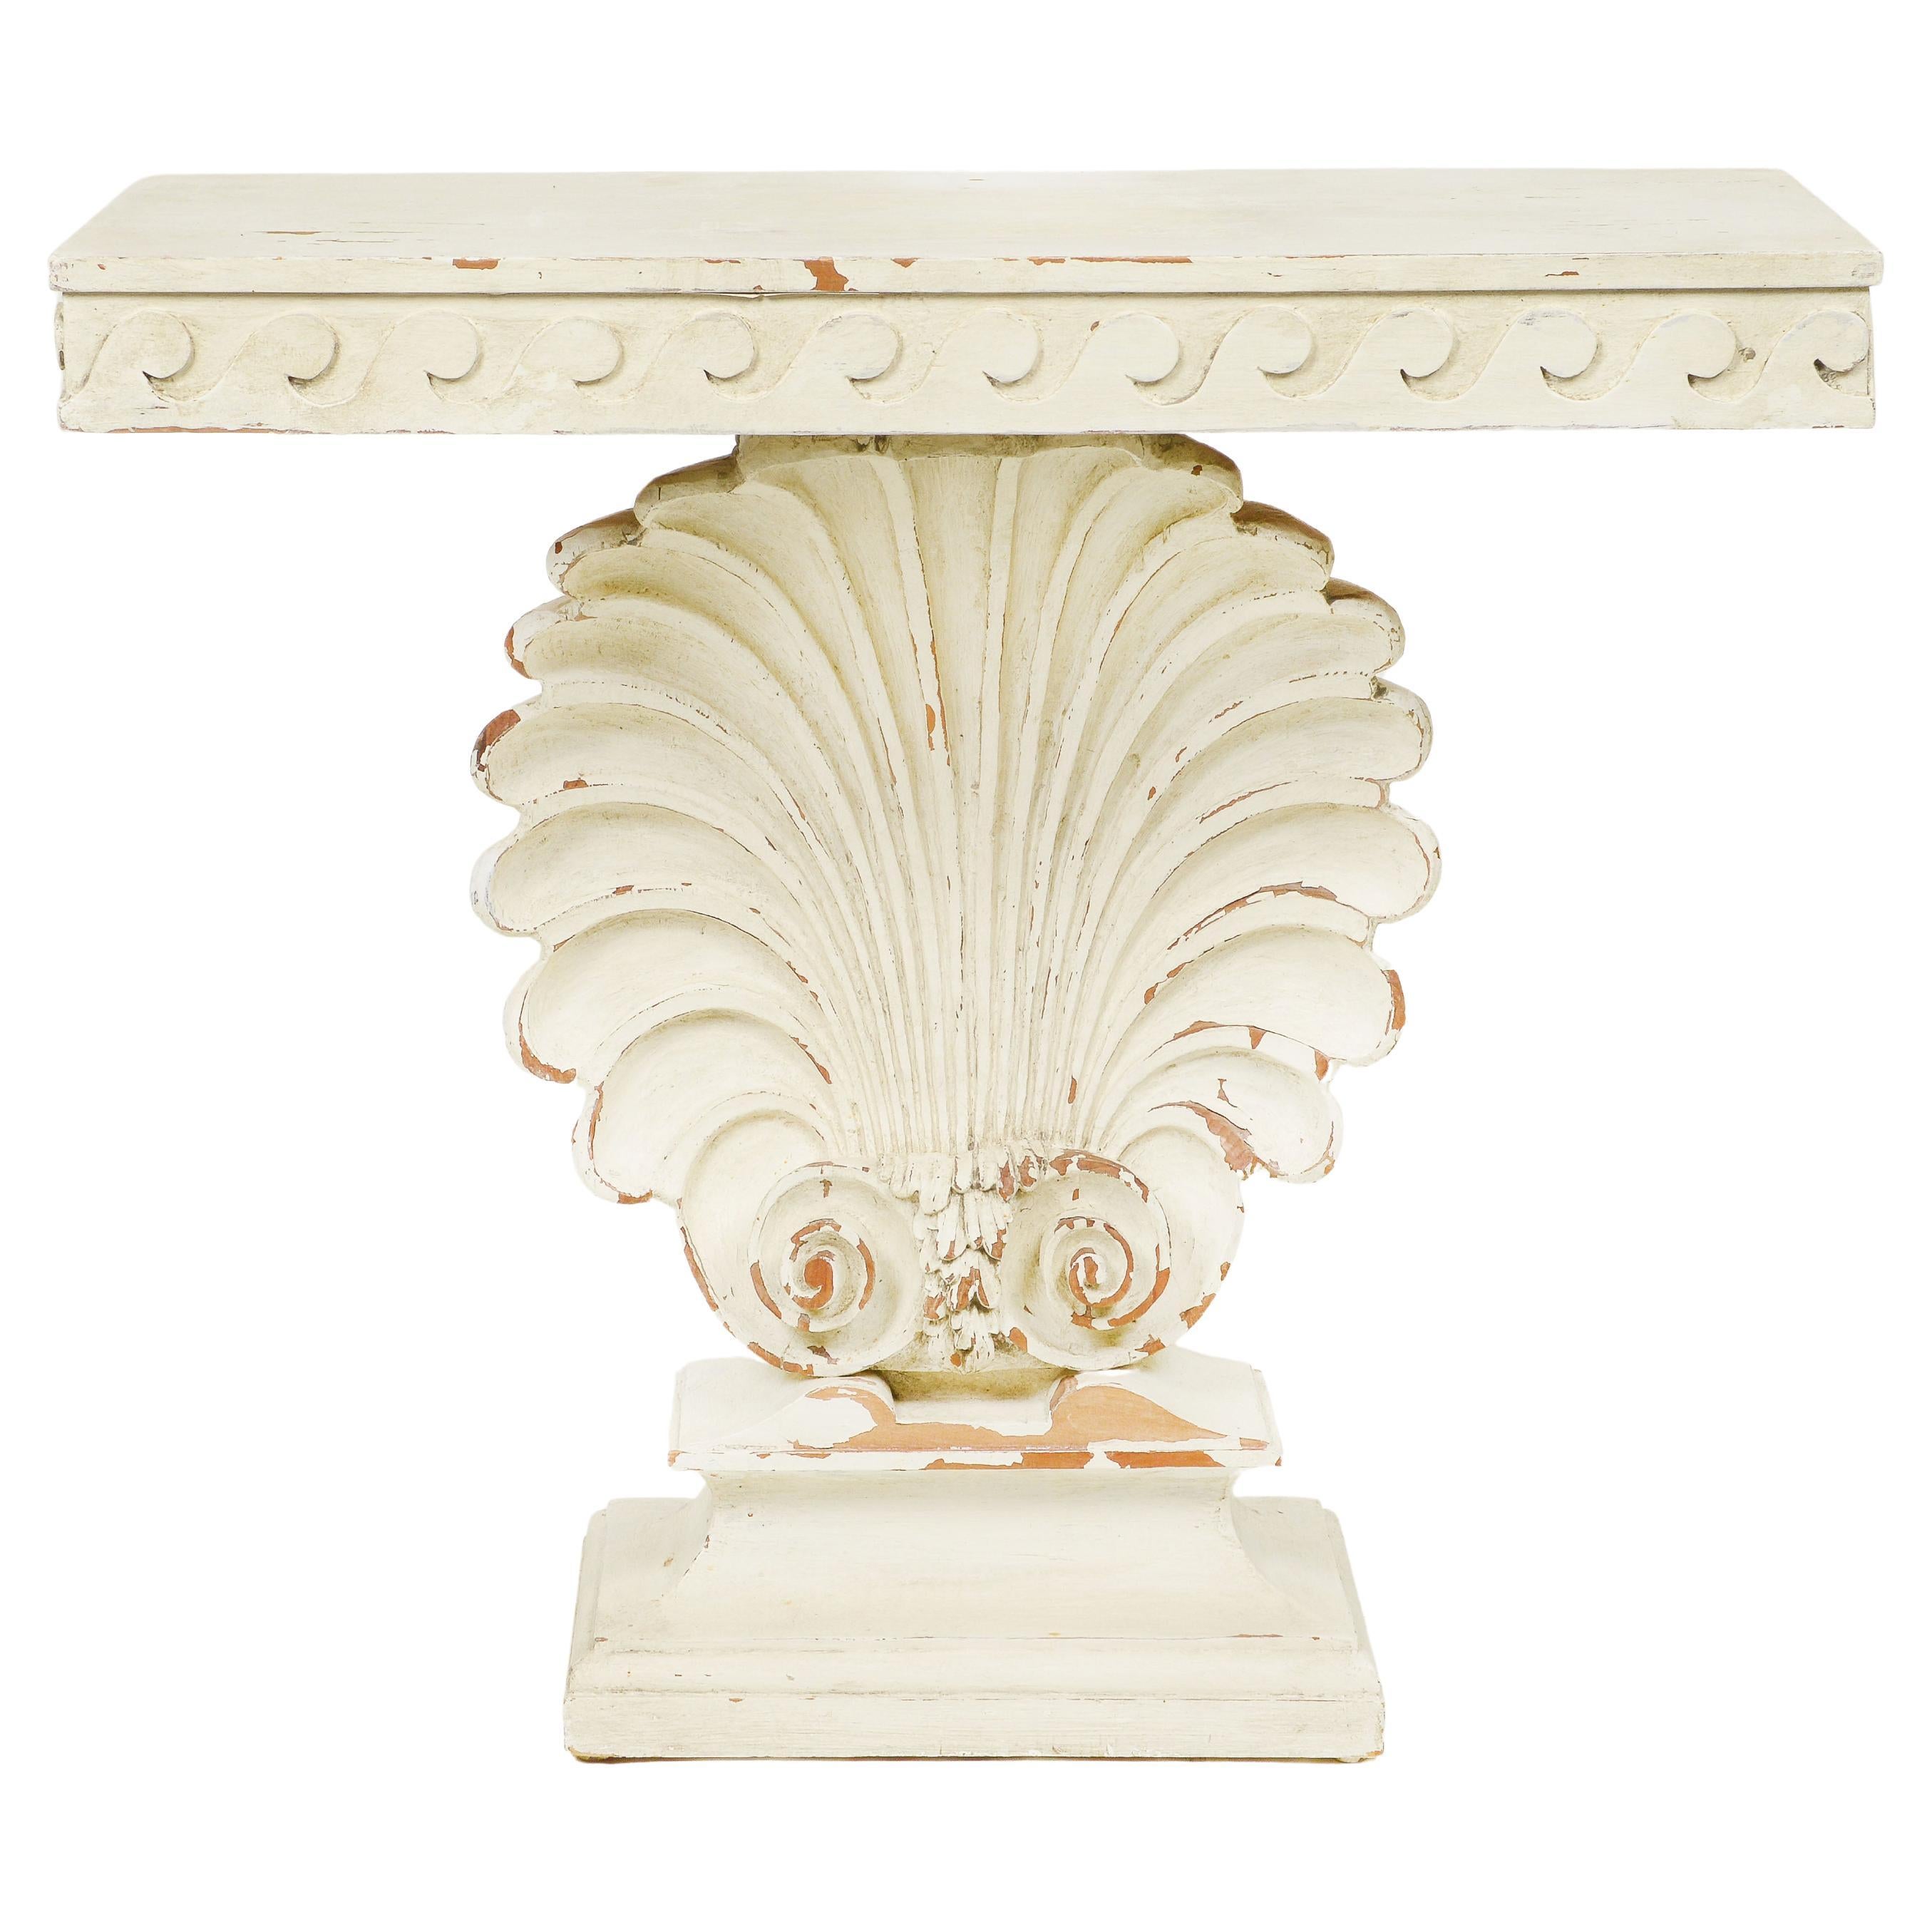 A Hollywood Regency White-Painted Shell Console Table